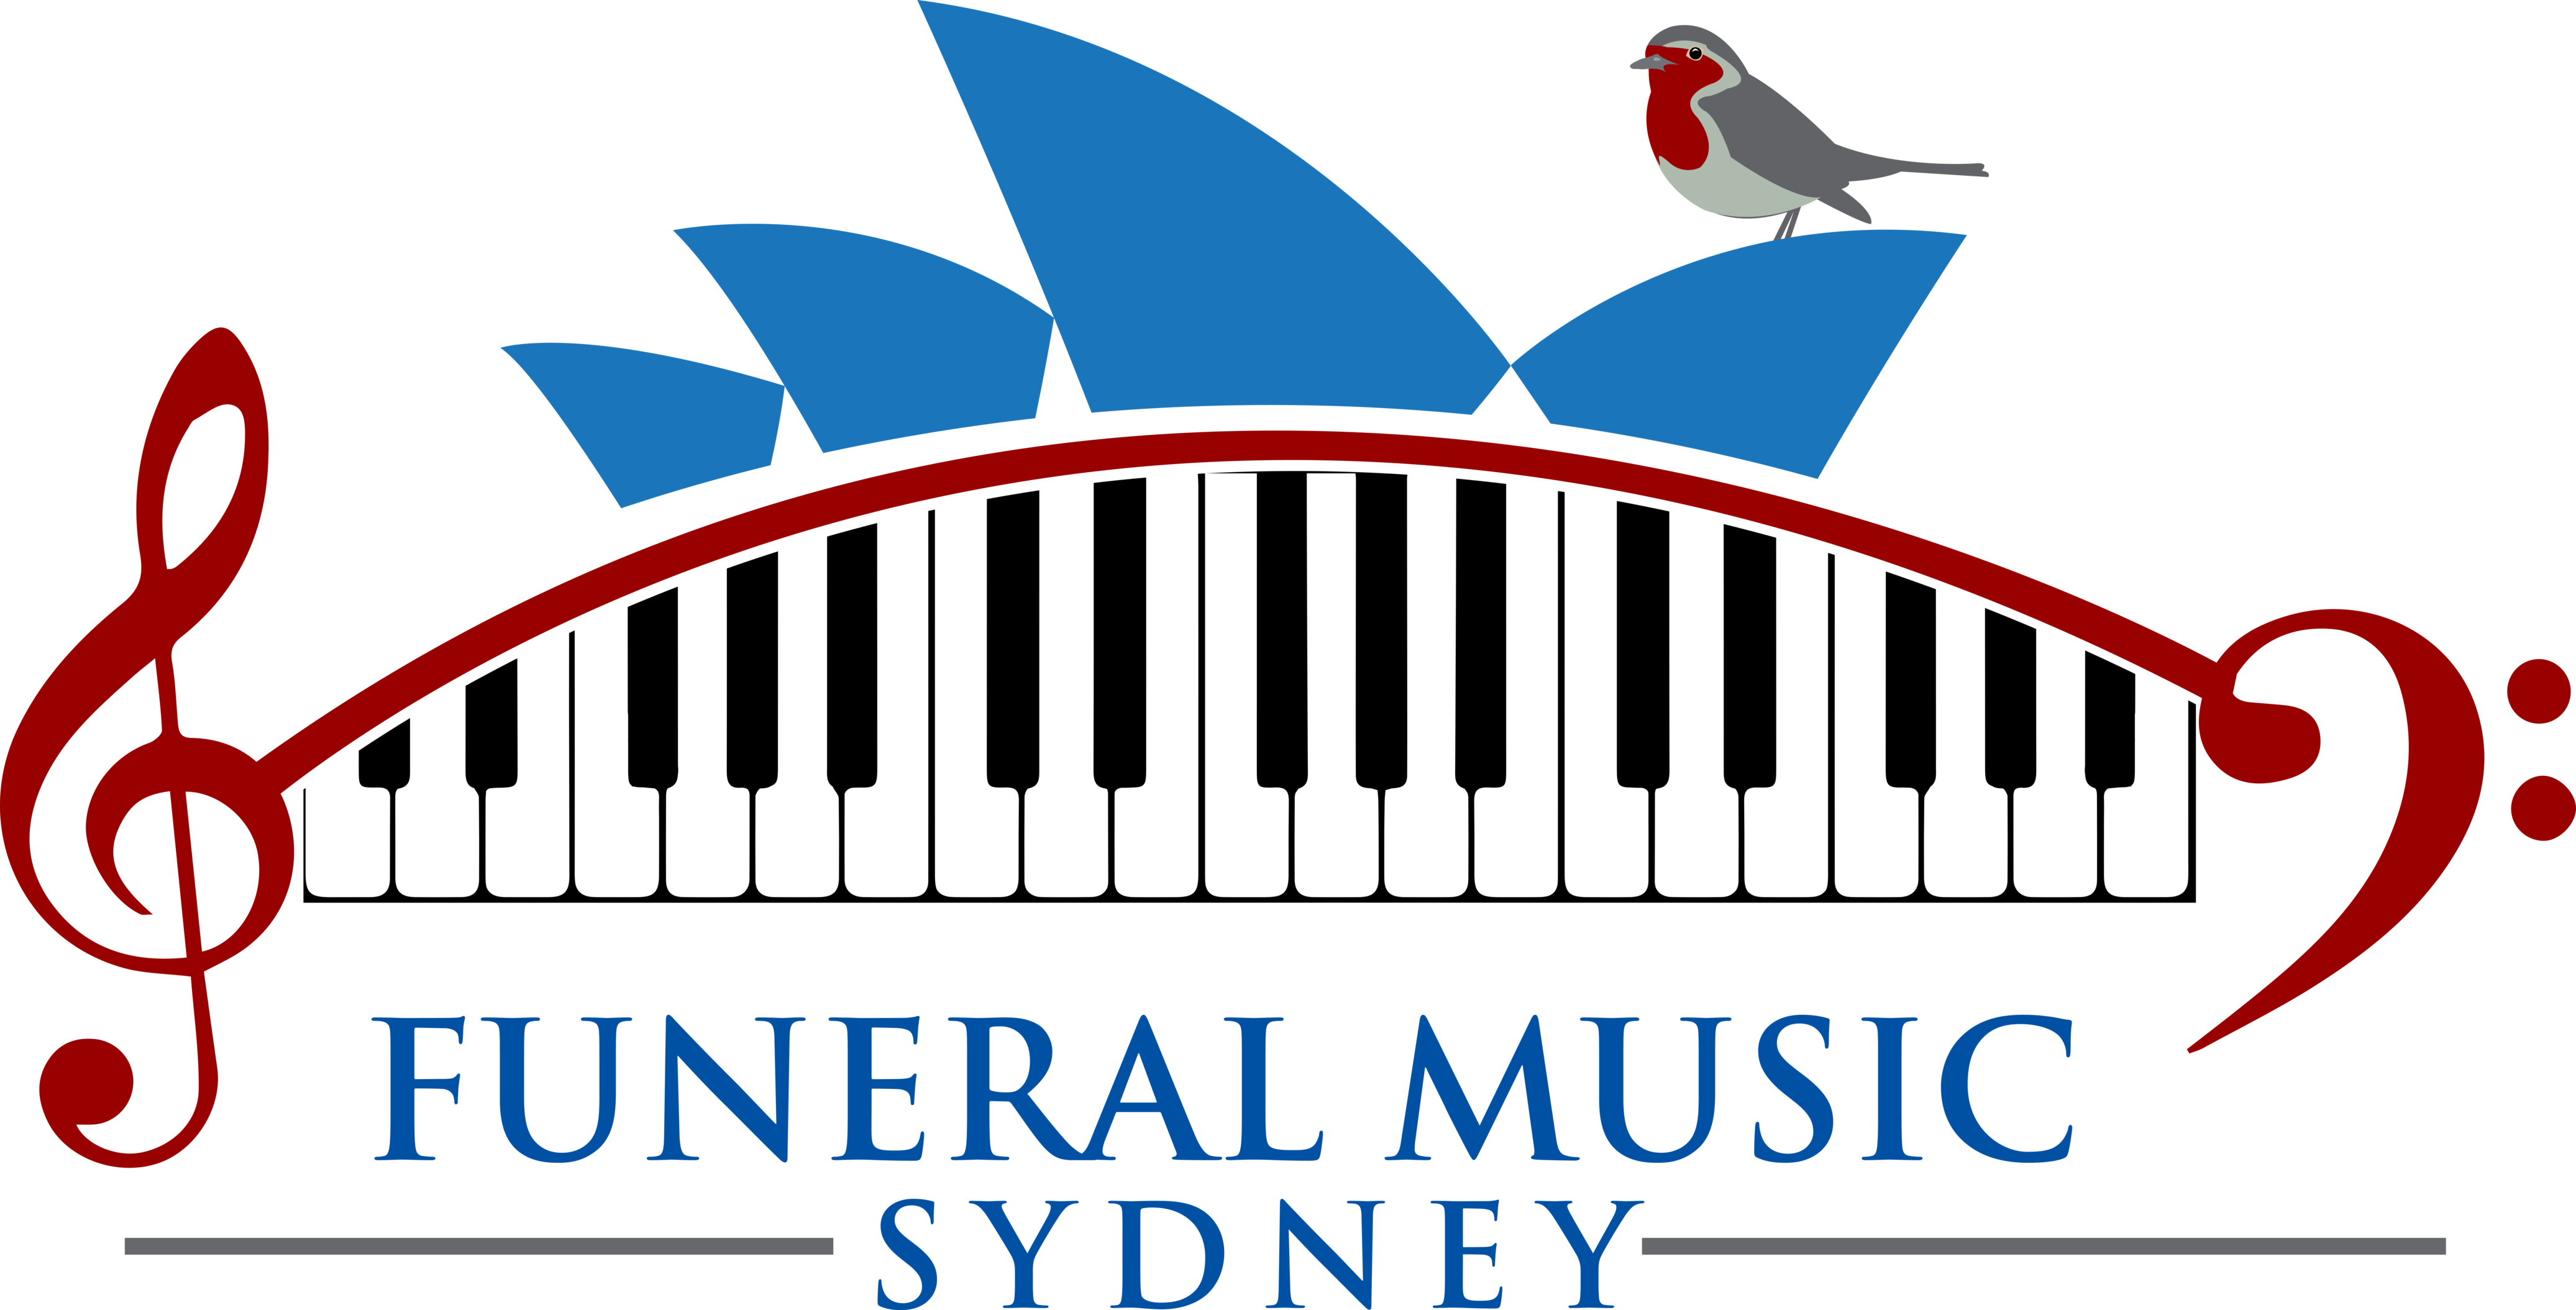 Funeral clipart bereavement. Music sydney robyn somers